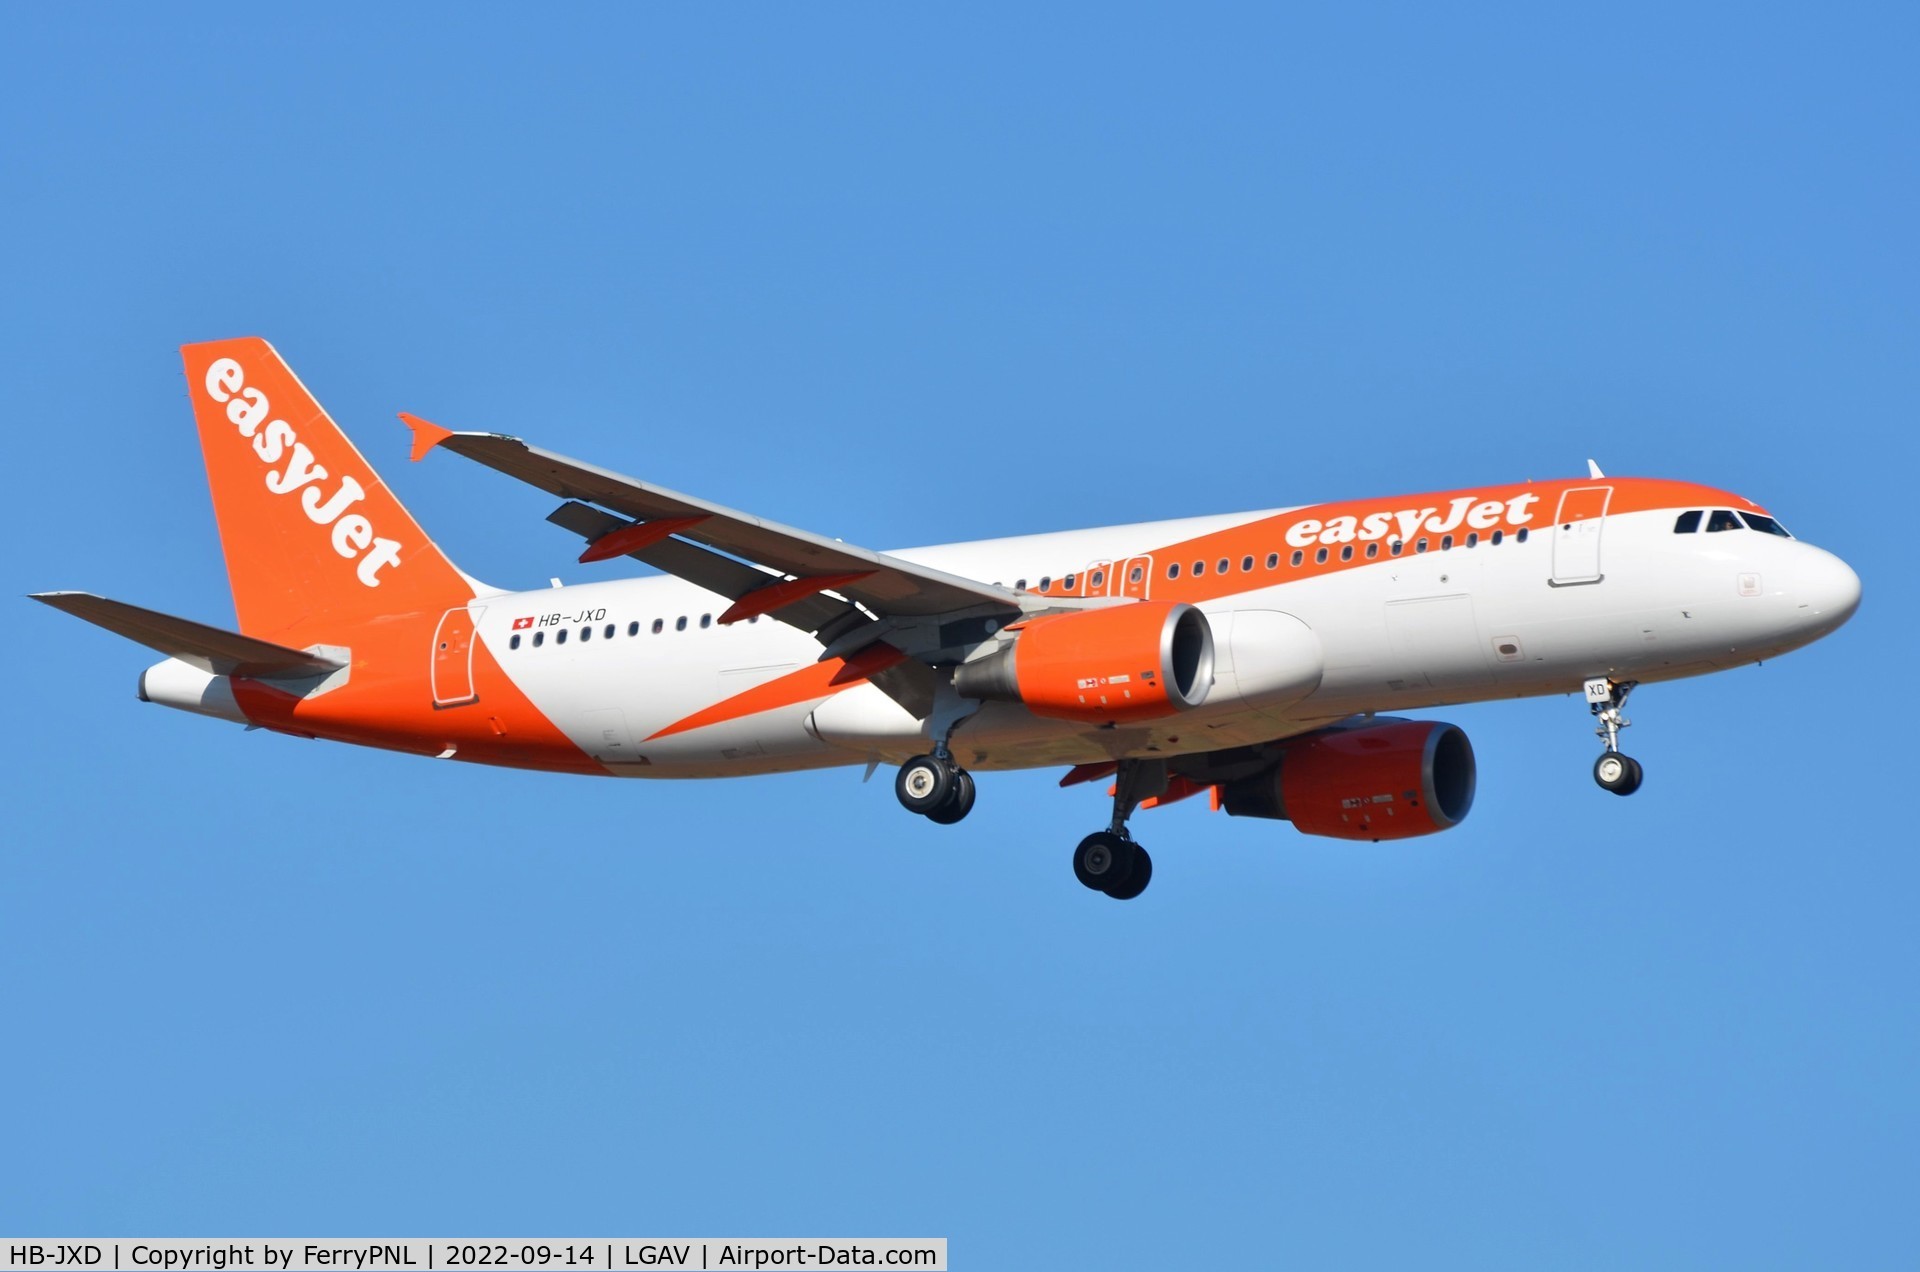 HB-JXD, 2011 Airbus A320-214 C/N 5150, Easyjet A320 arriving from GVA